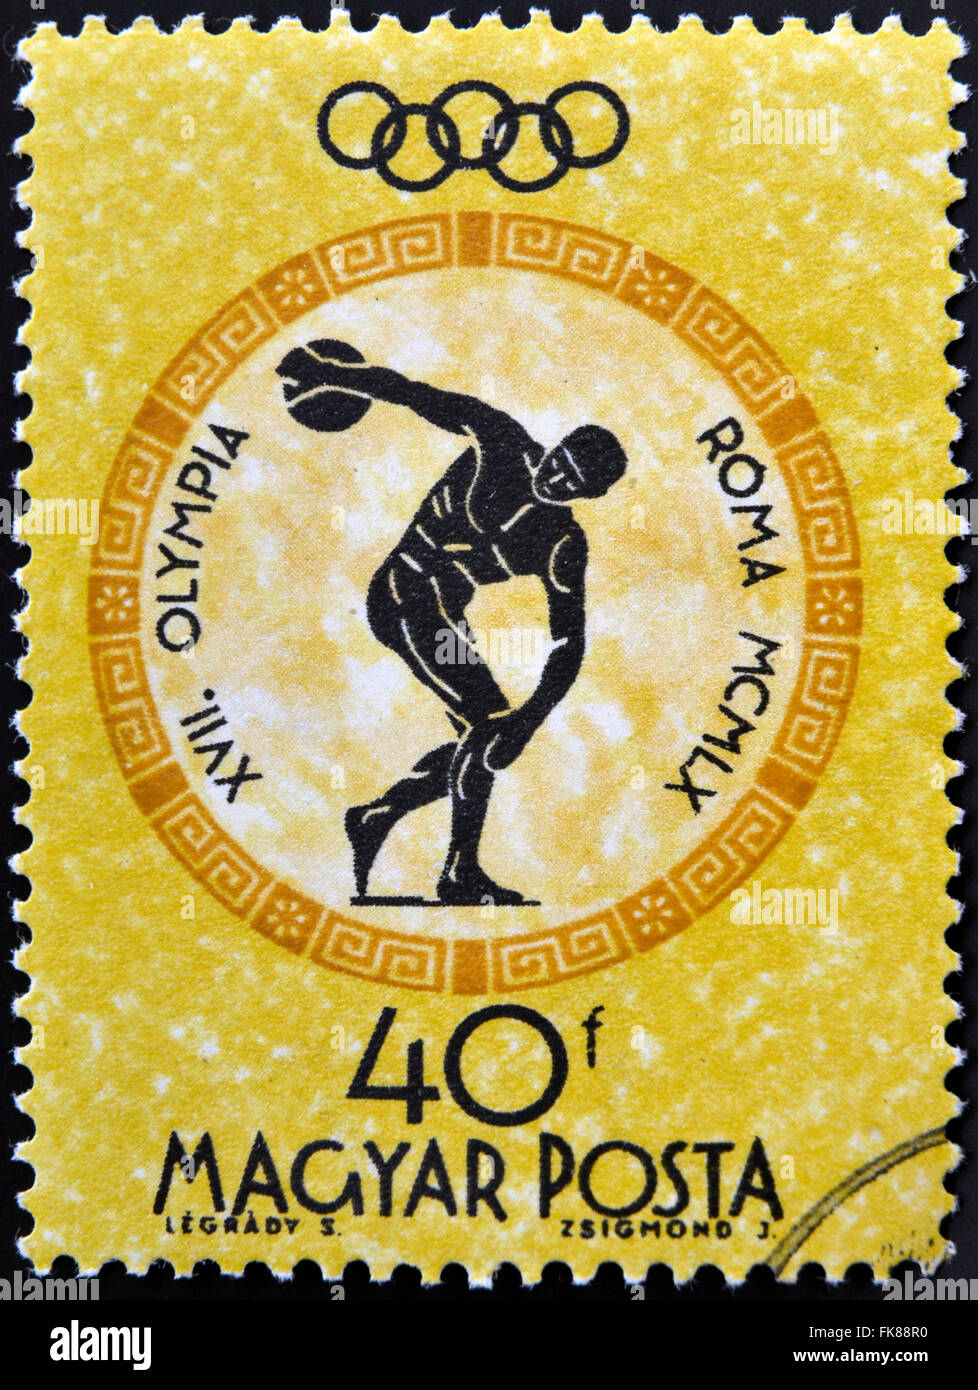 HUNGARY - CIRCA 1960: A stamp printed in Hungary shows discobolus, devoted to the Olympic games in Rome, circa 1960 Stock Photo